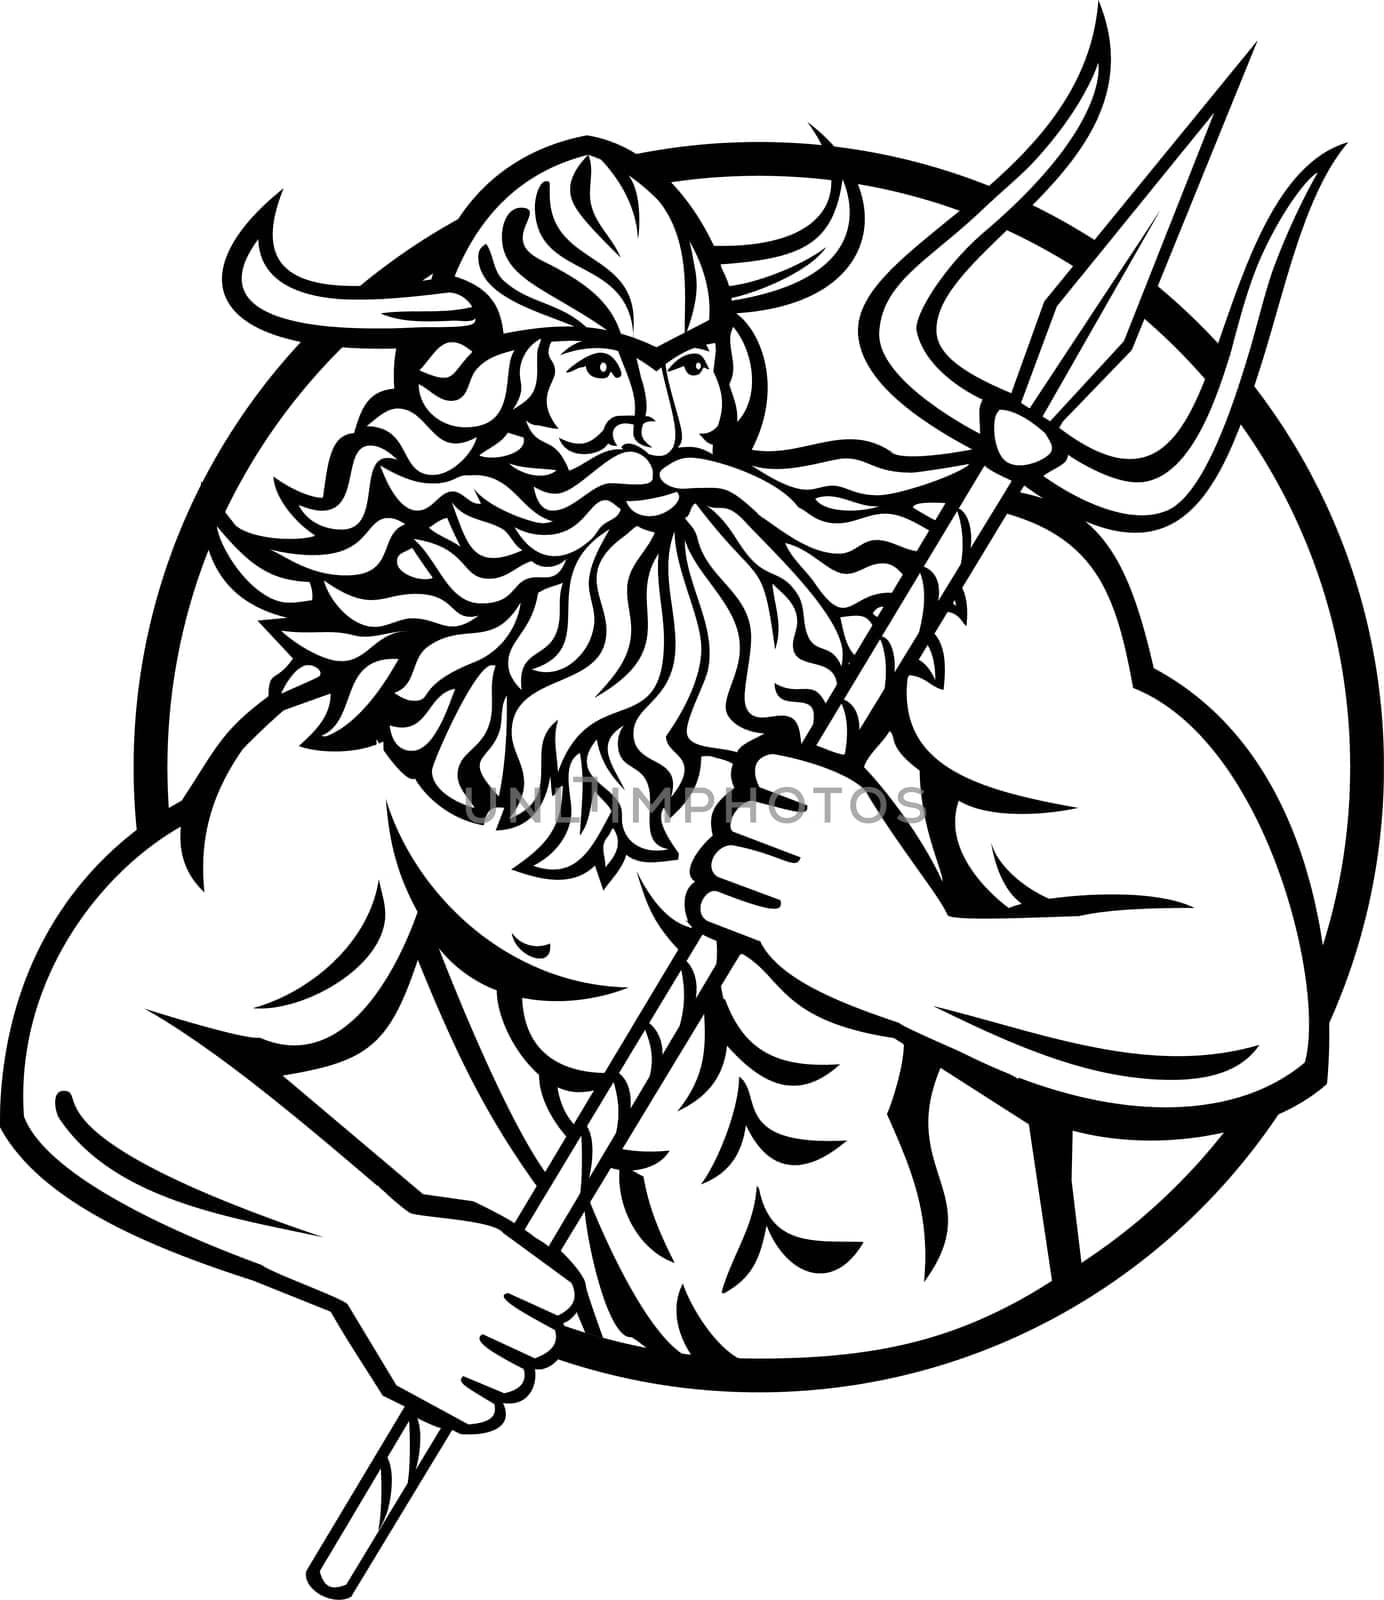 Mascot illustration of Aegir, Hler or Gymir God of the sea in Norse mythology with trident viewed from front set inside circle on isolated background in retro style.